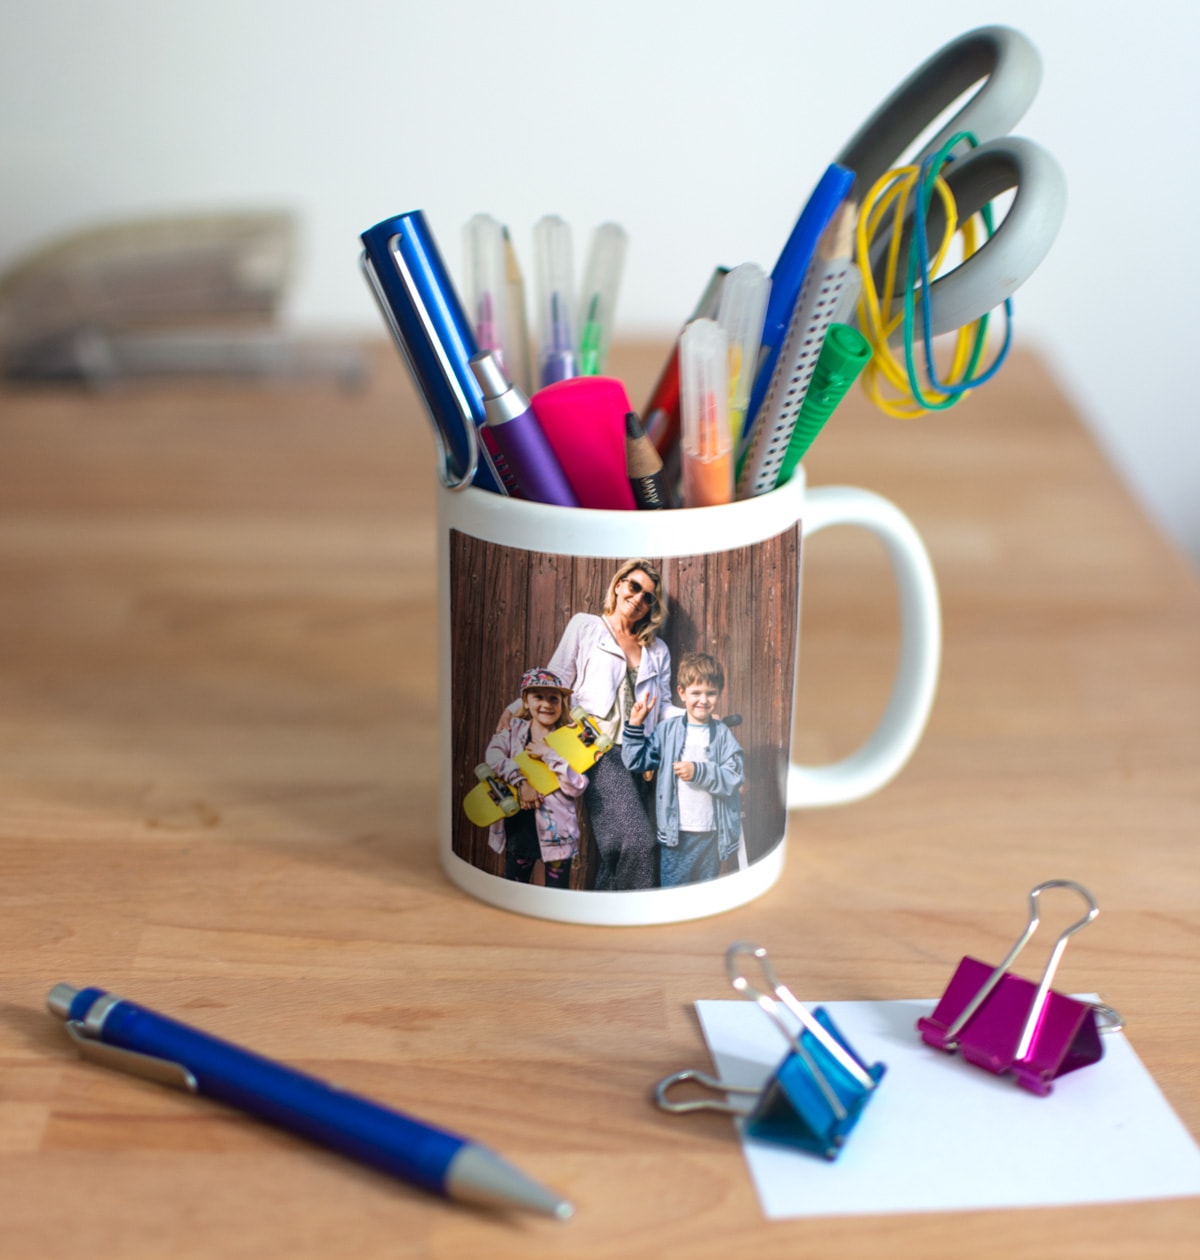 Two photo mugs used as make-up brush holders to tidy a dressing table